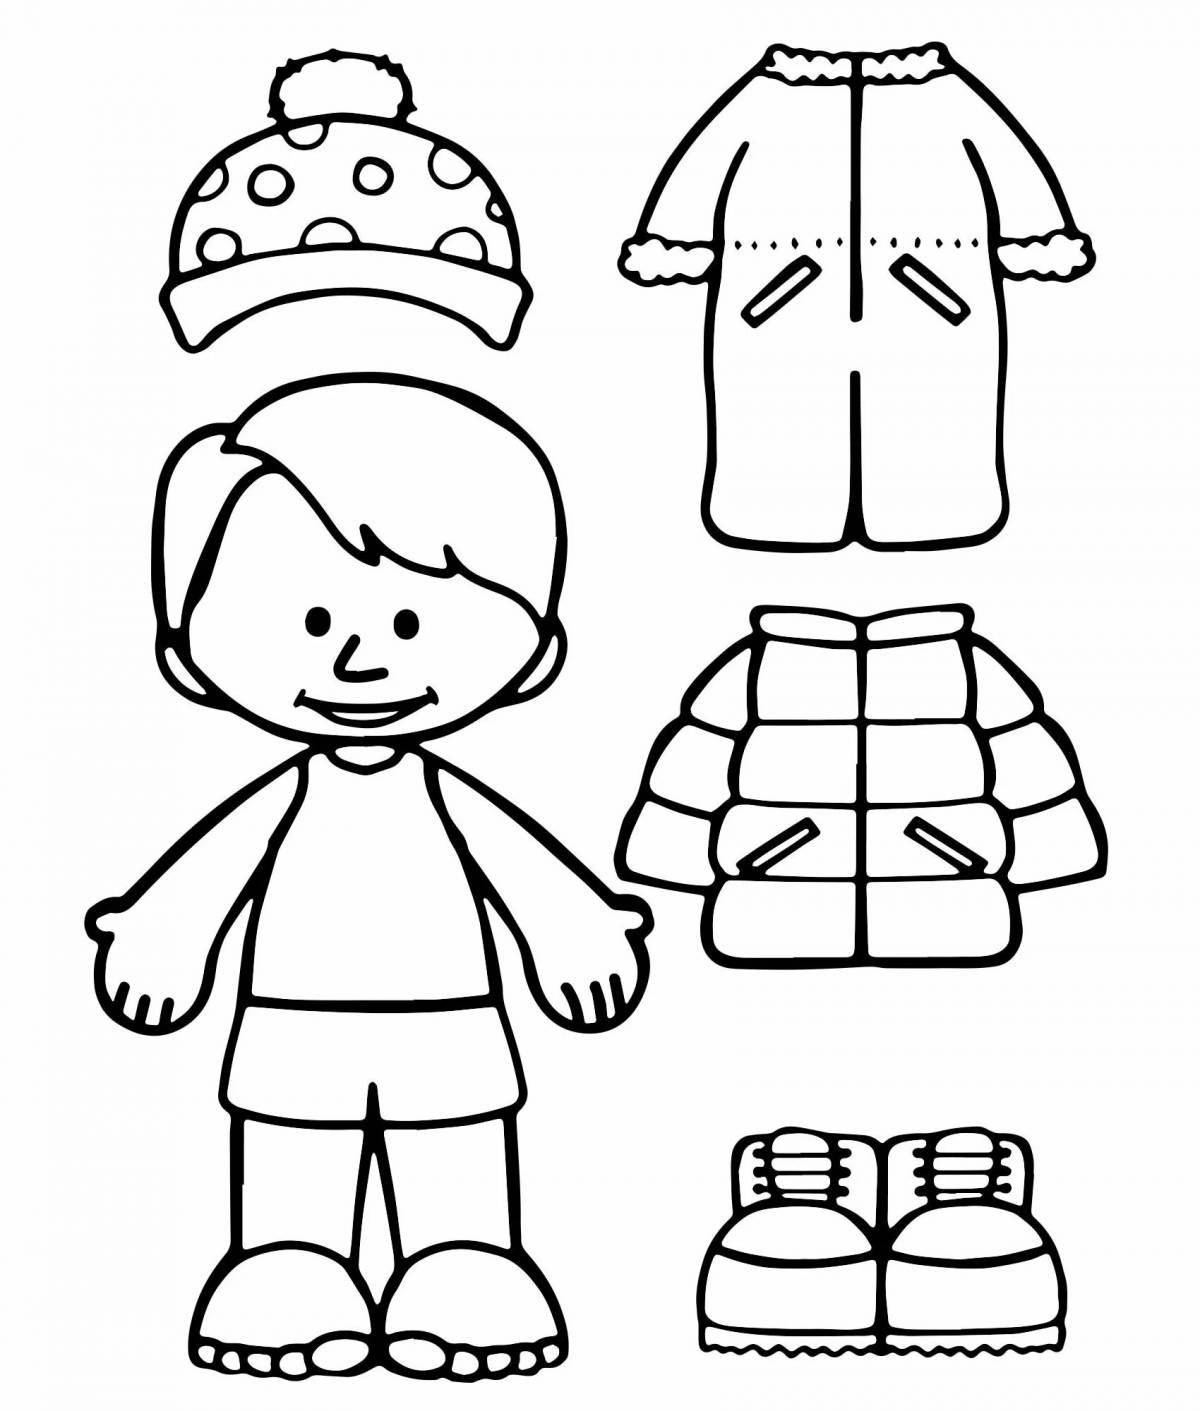 Playful baby winter clothes coloring page